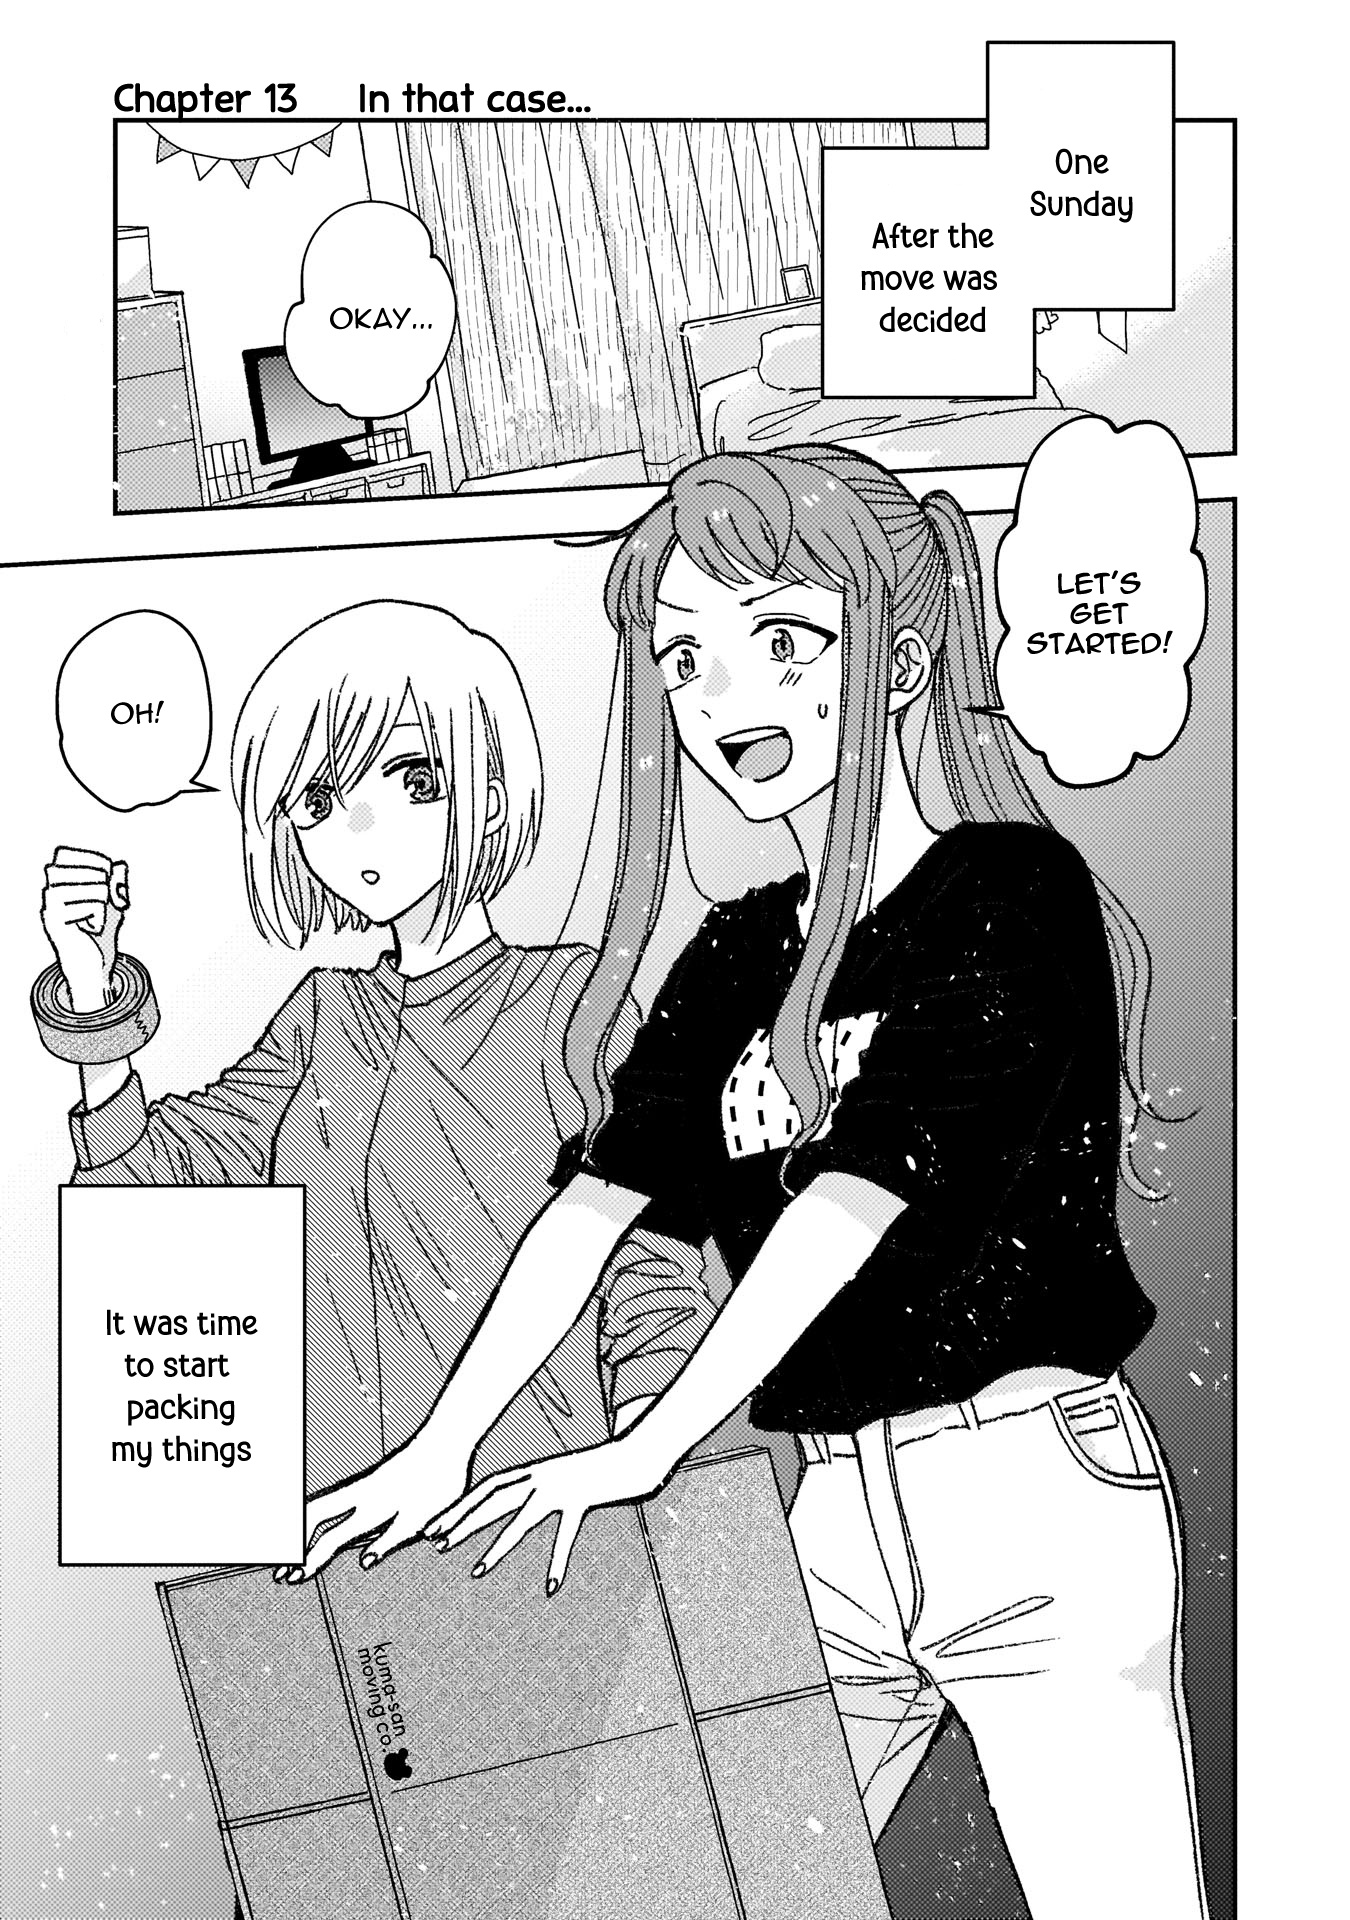 With Her Who Likes My Sister Vol.2 Chapter 13